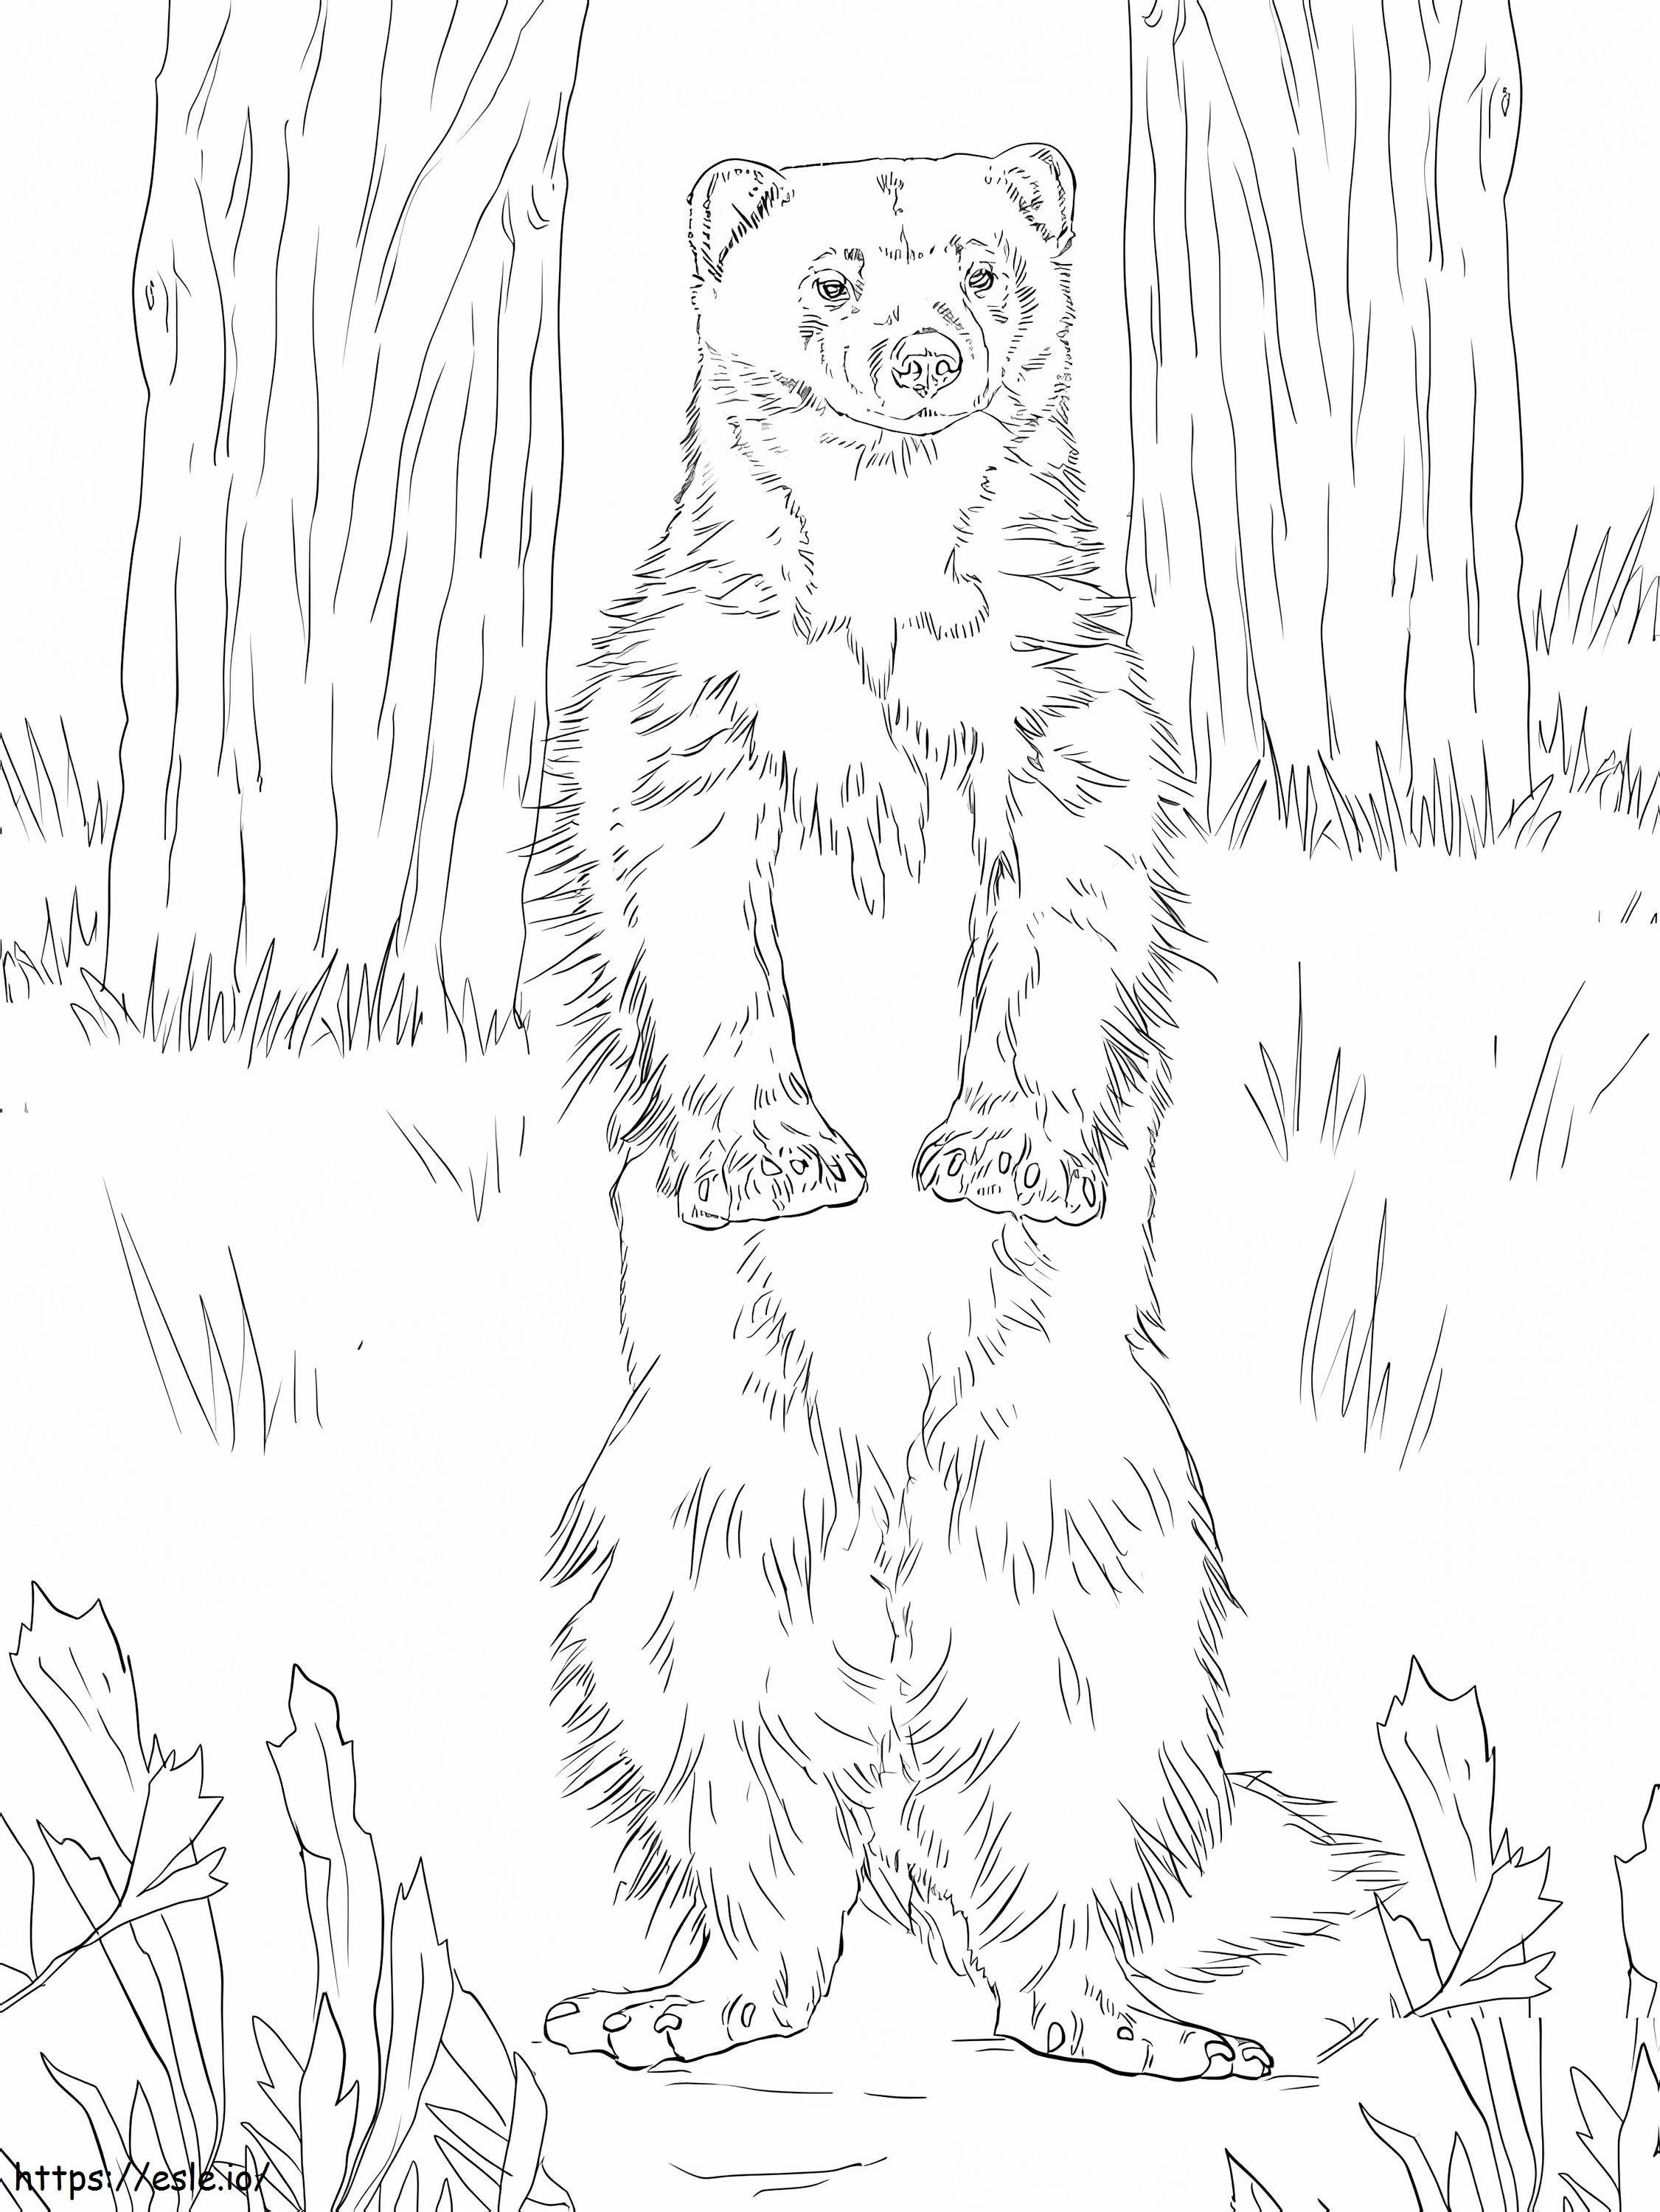 Wolverine In The Forest coloring page